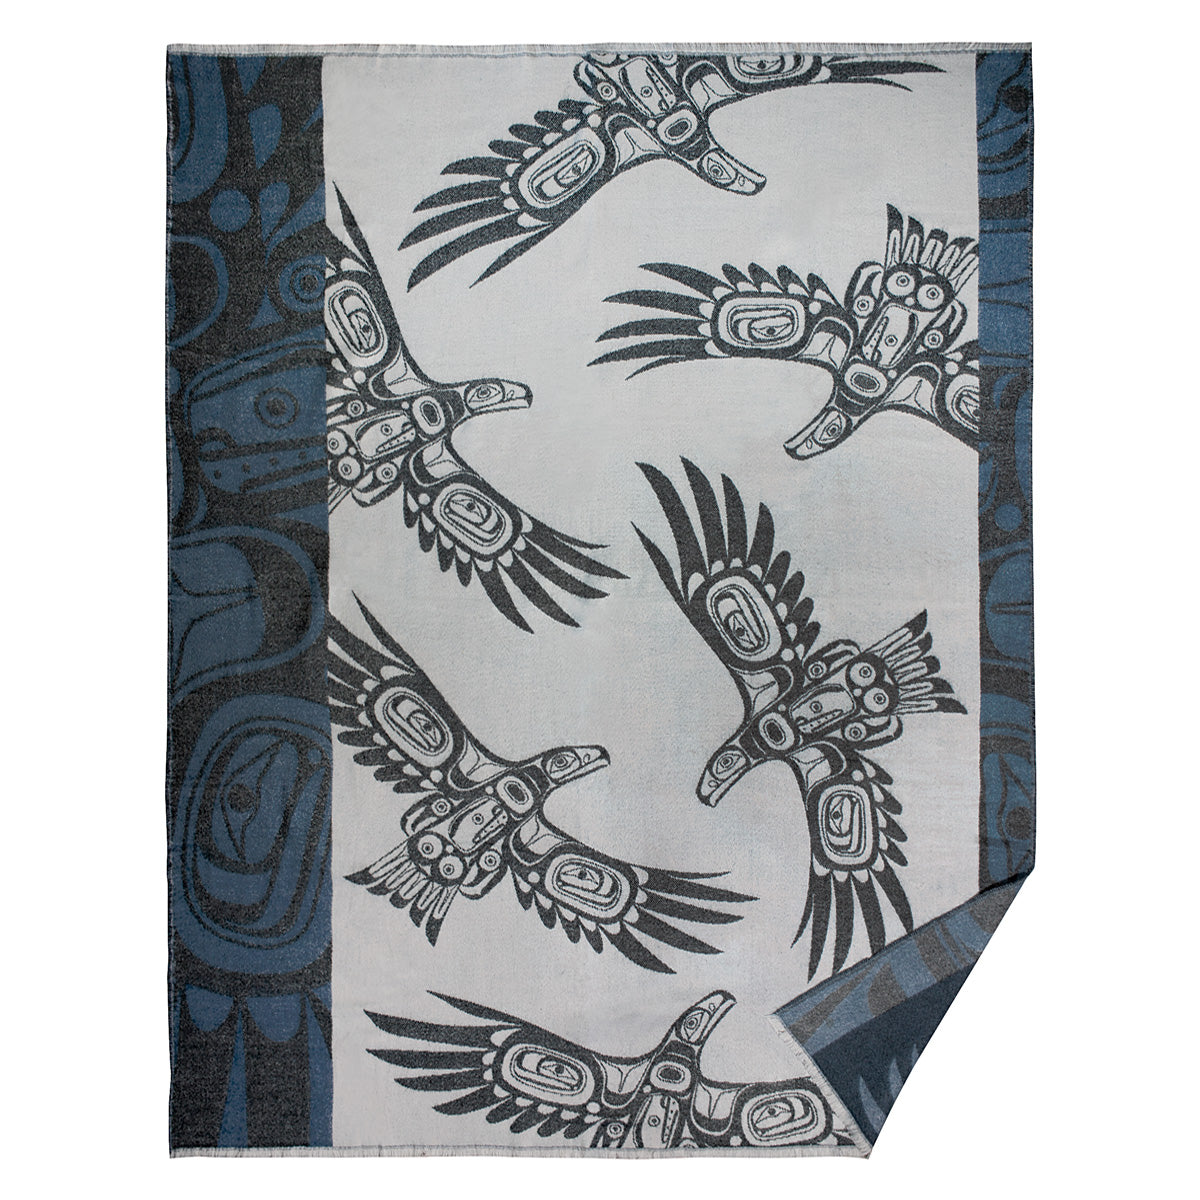 Woven Blanket Corey Bulpitt Soaring Eagle - Woven Blanket Corey Bulpitt Soaring Eagle -  - House of Himwitsa Native Art Gallery and Gifts